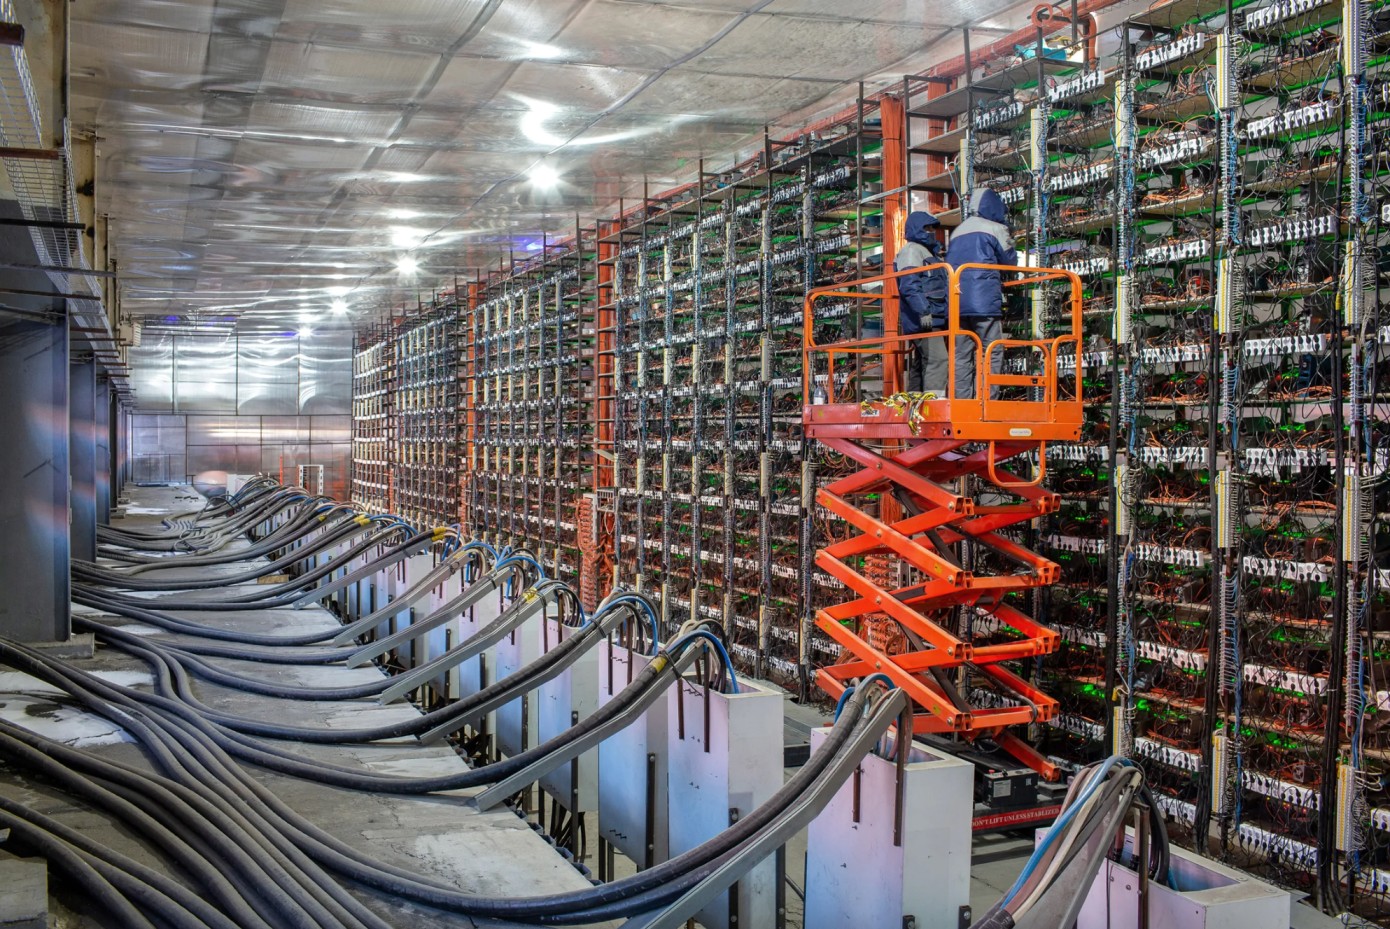 Bitcoin Mining: Everything You Need to Know!